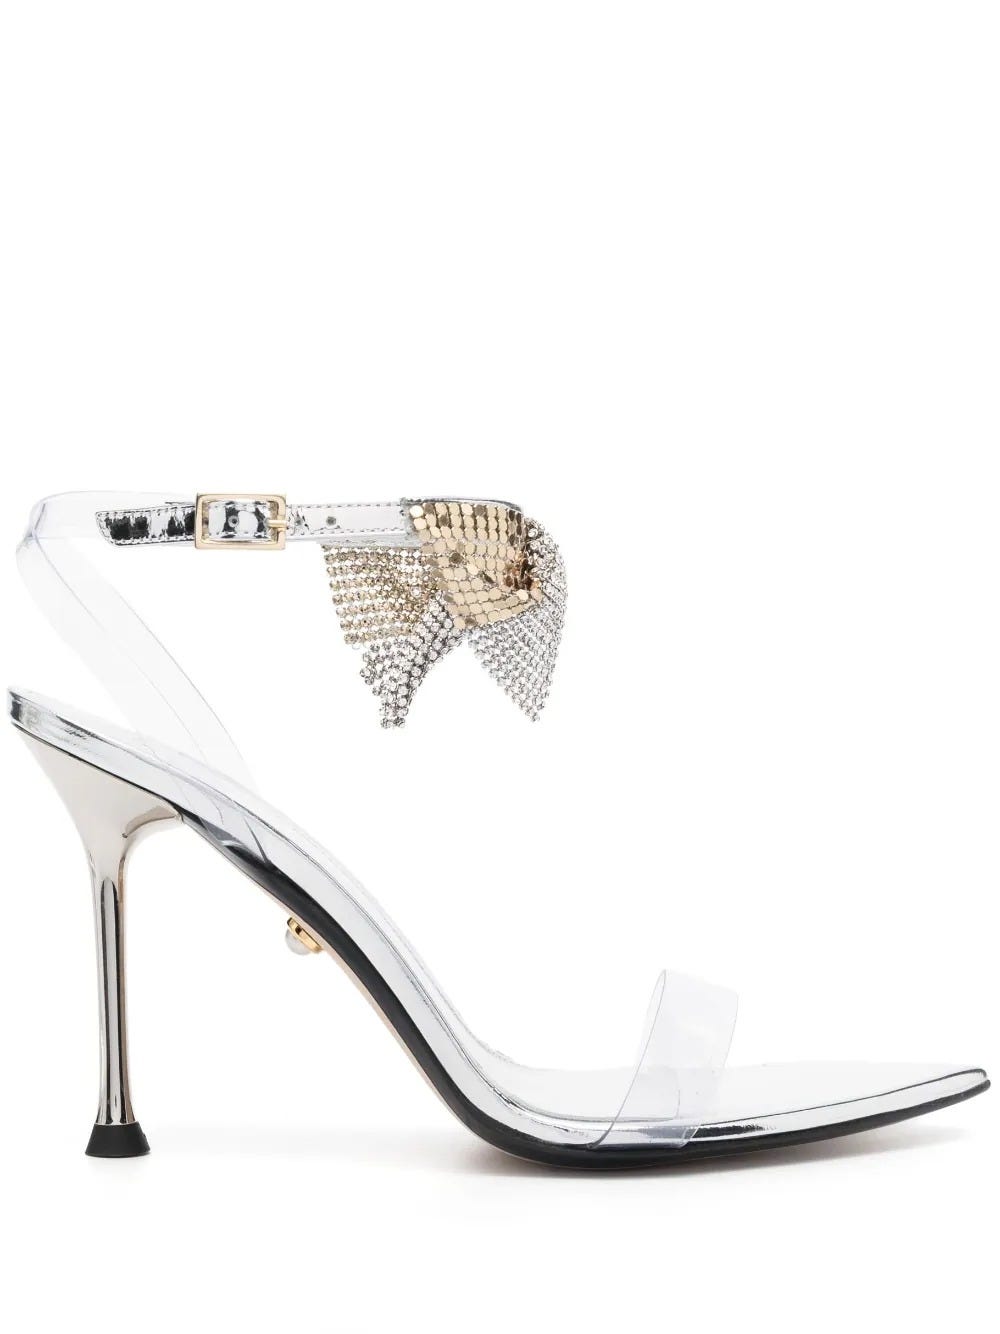 ALEVÌ SILVER SANDAL WITH CLEAR PVC AND CRYSTALS AT THE ANKLE